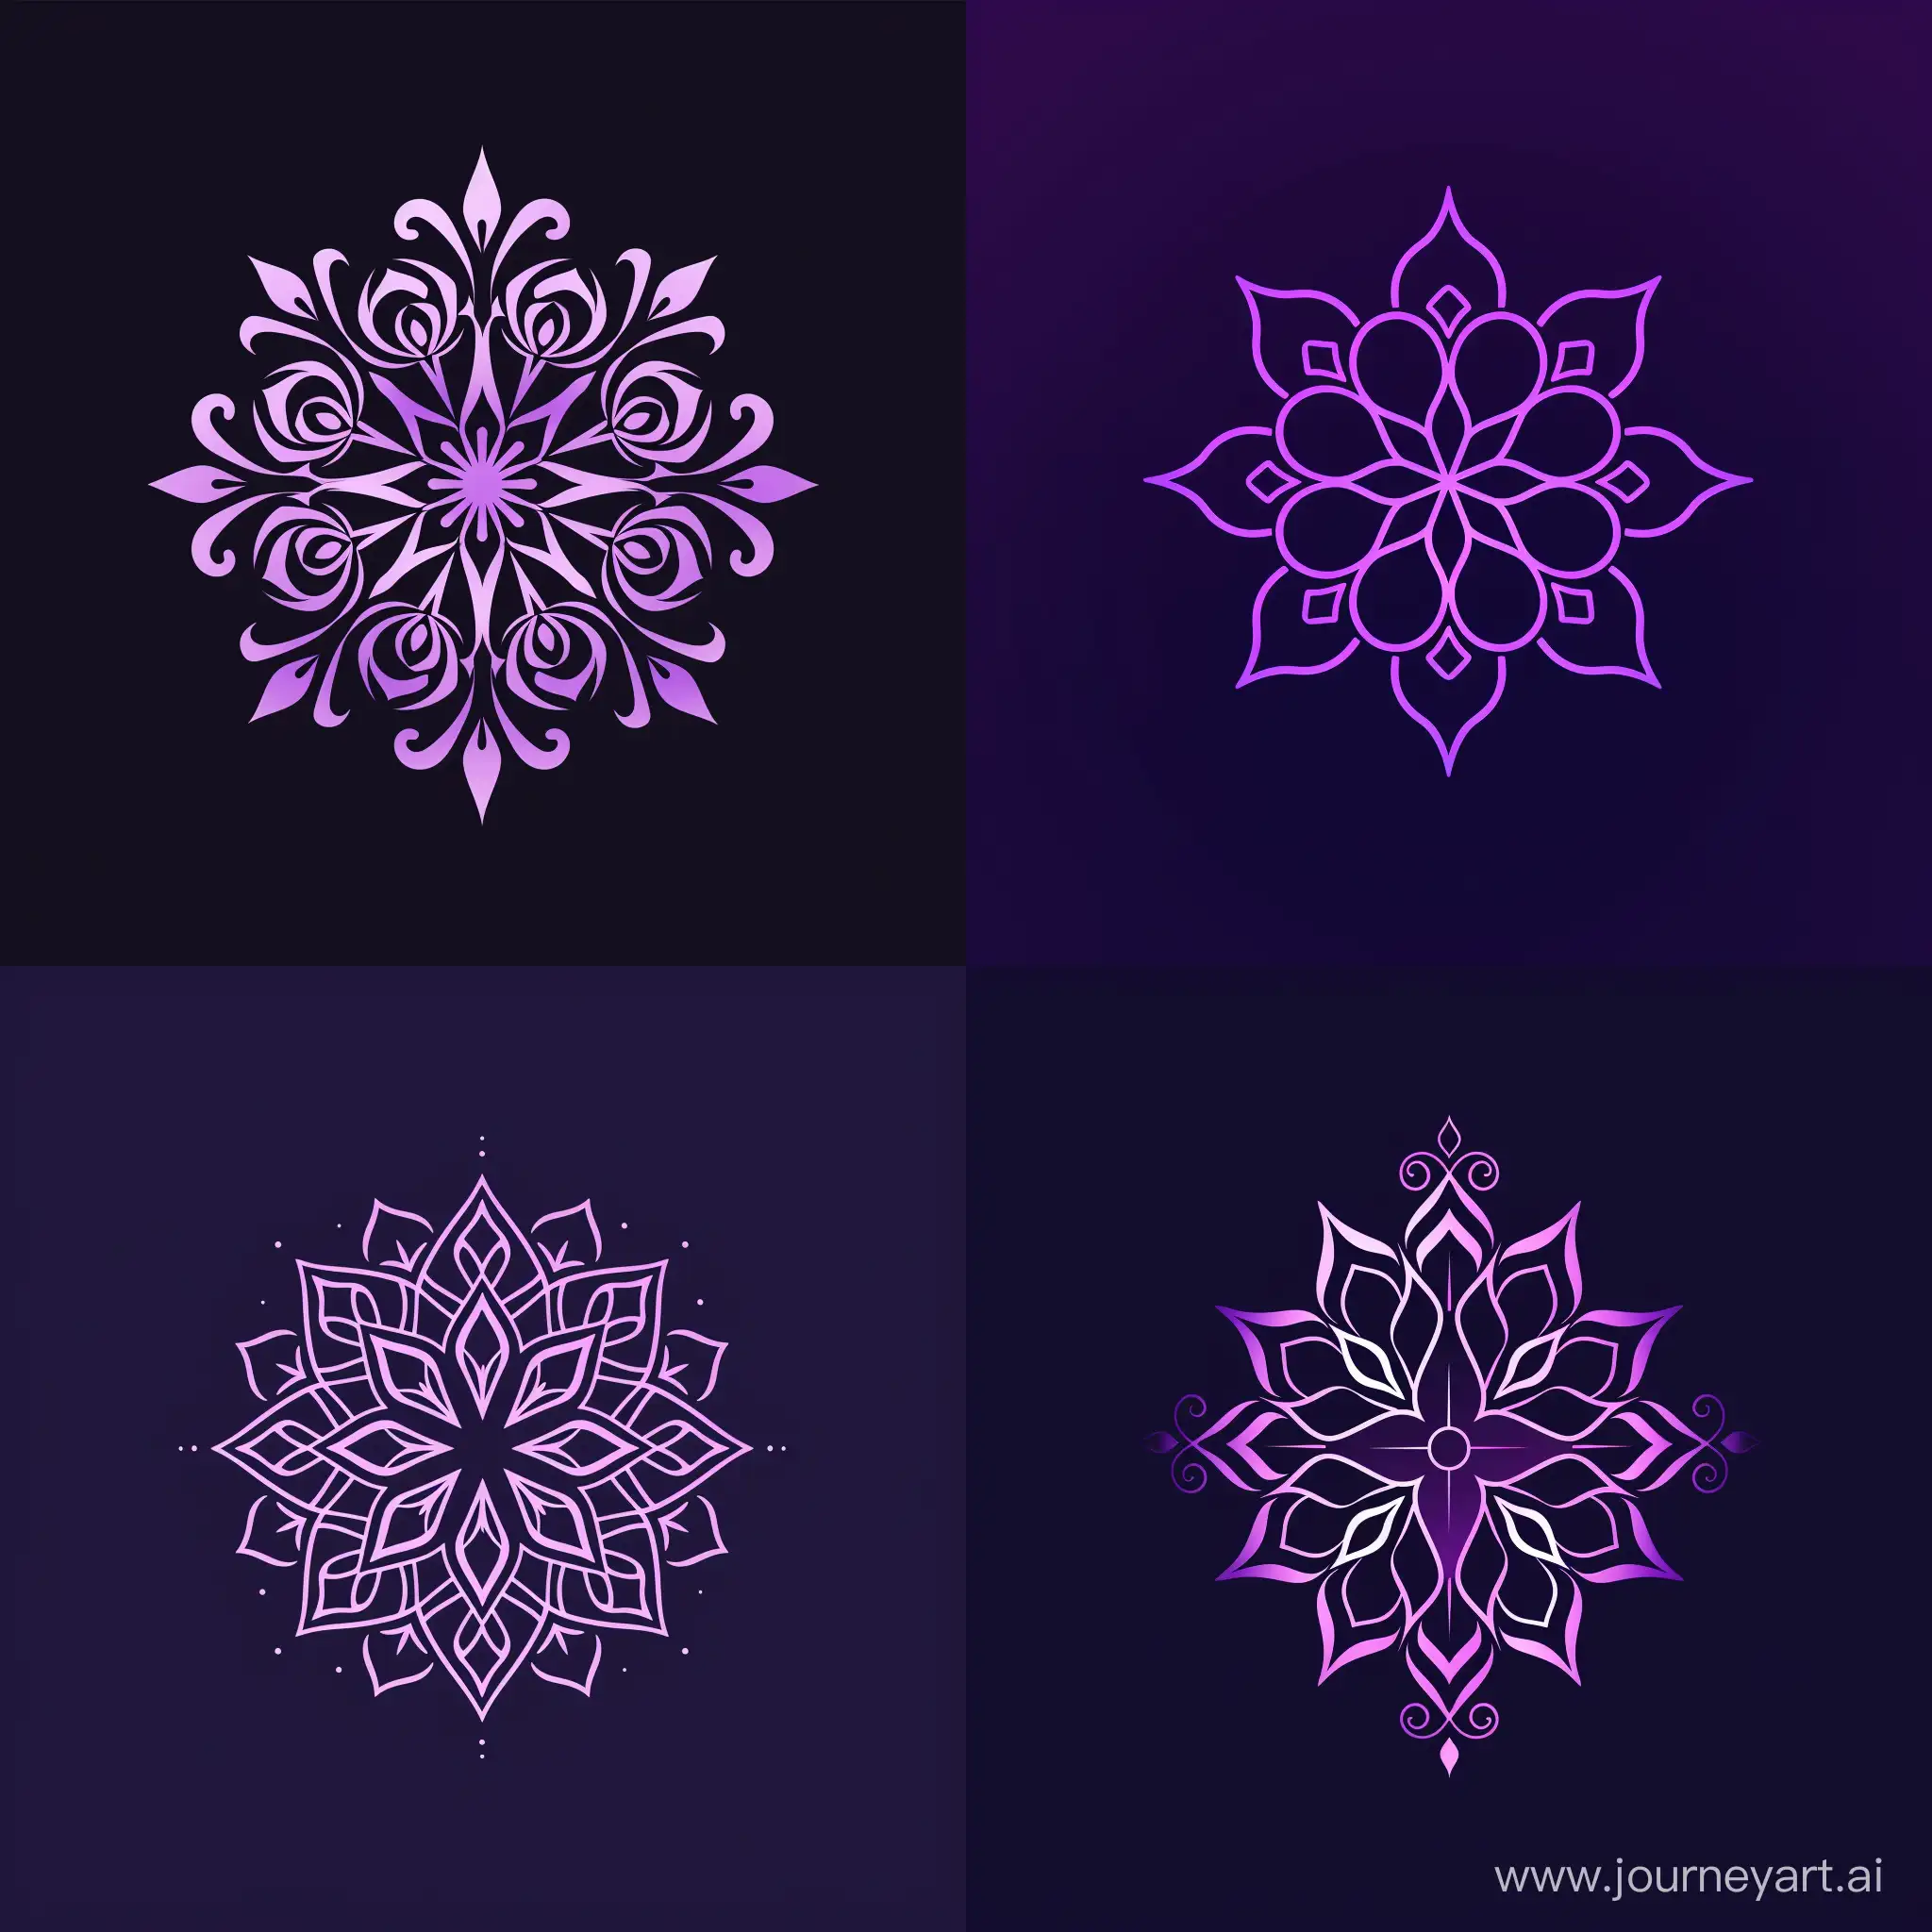 logo for a financial website. the logo should be inspired by a mandala symbol, have the purple color and be minimalistic without lots of details